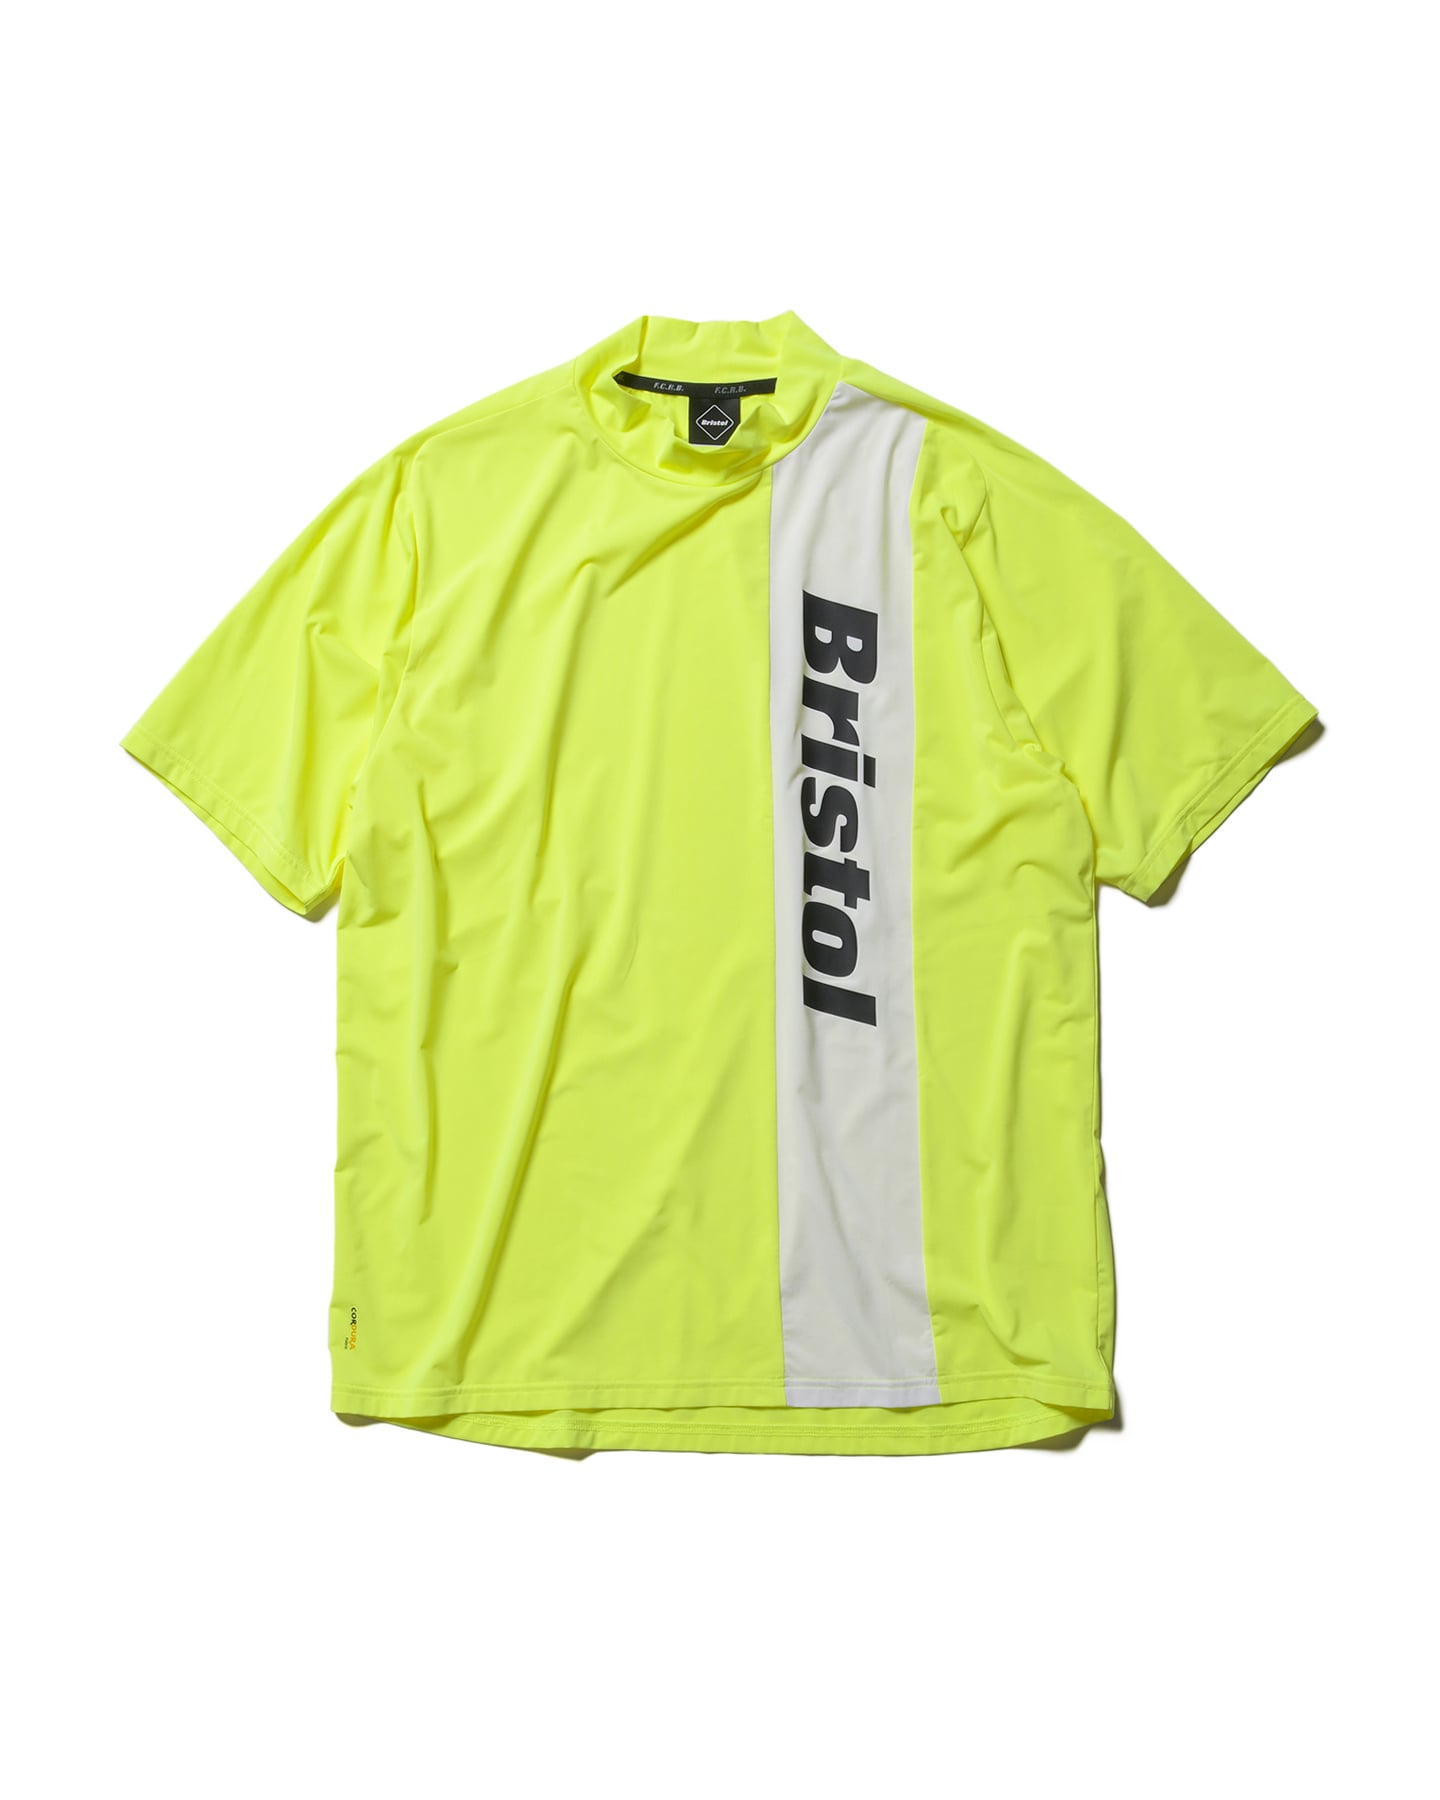 SOPH. | COOL TOUCH S/S MOCKNECK TOP(M YELLOW):